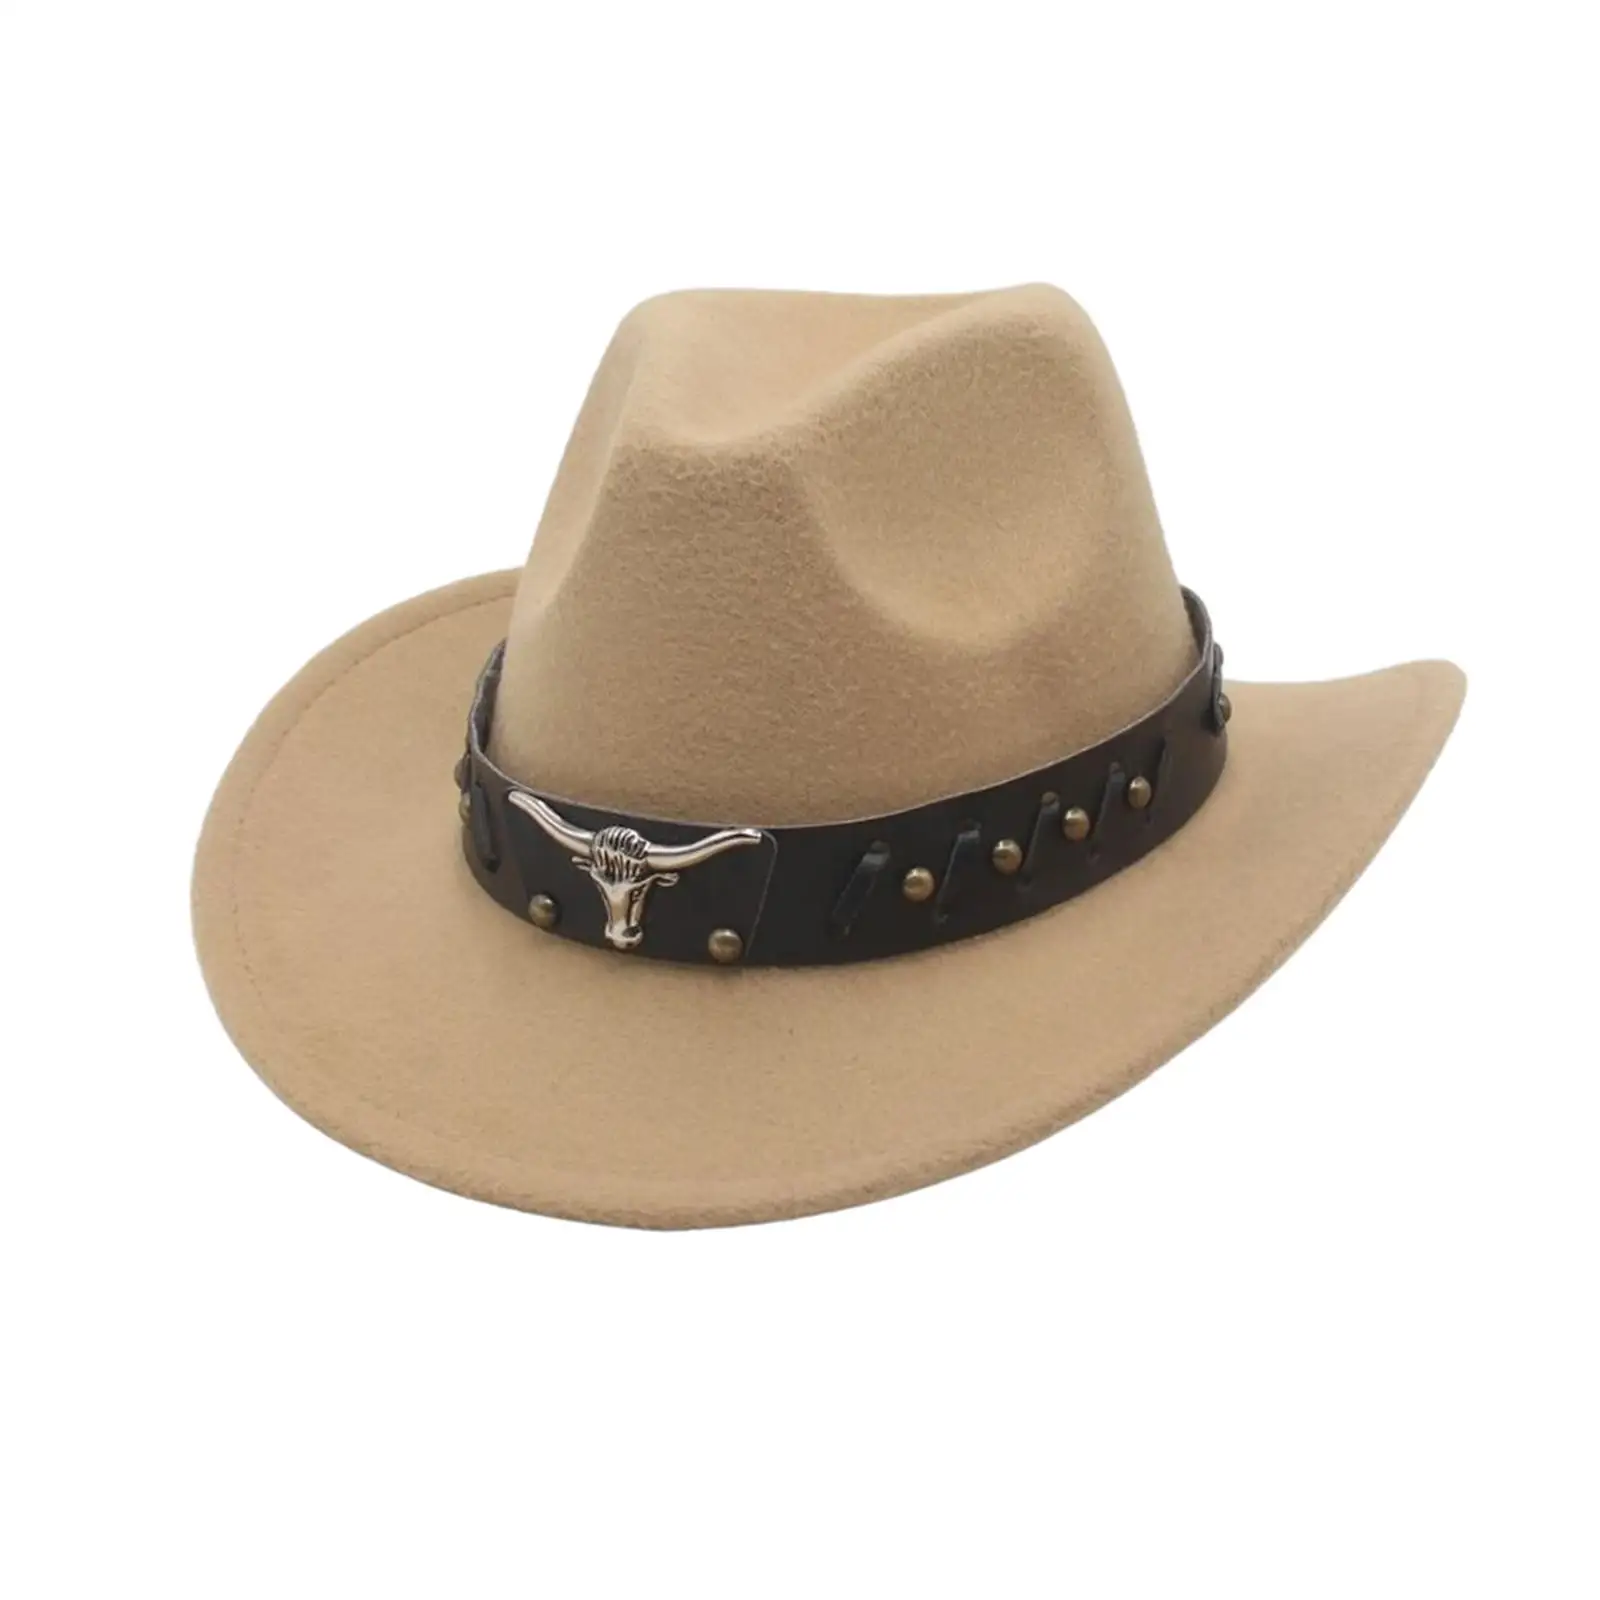 Cowboy Hat Sun Hat Women Wide Brim Decor Classic Western Cowgirl Hat Sun Protection for Fishing Gift Travel Autumn Party